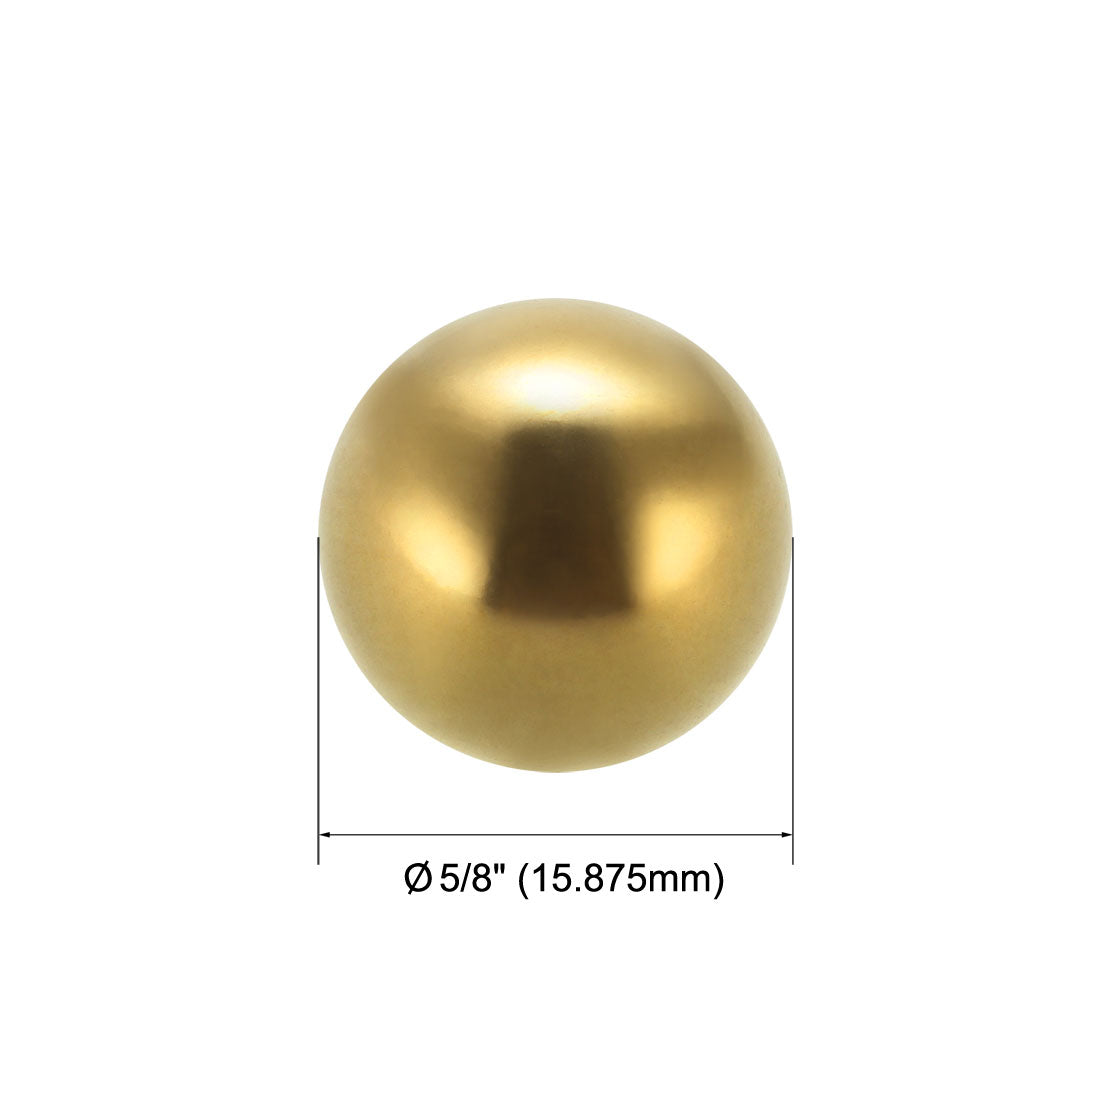 Uxcell Uxcell 5/8" Precision Solid Brass Bearing Balls